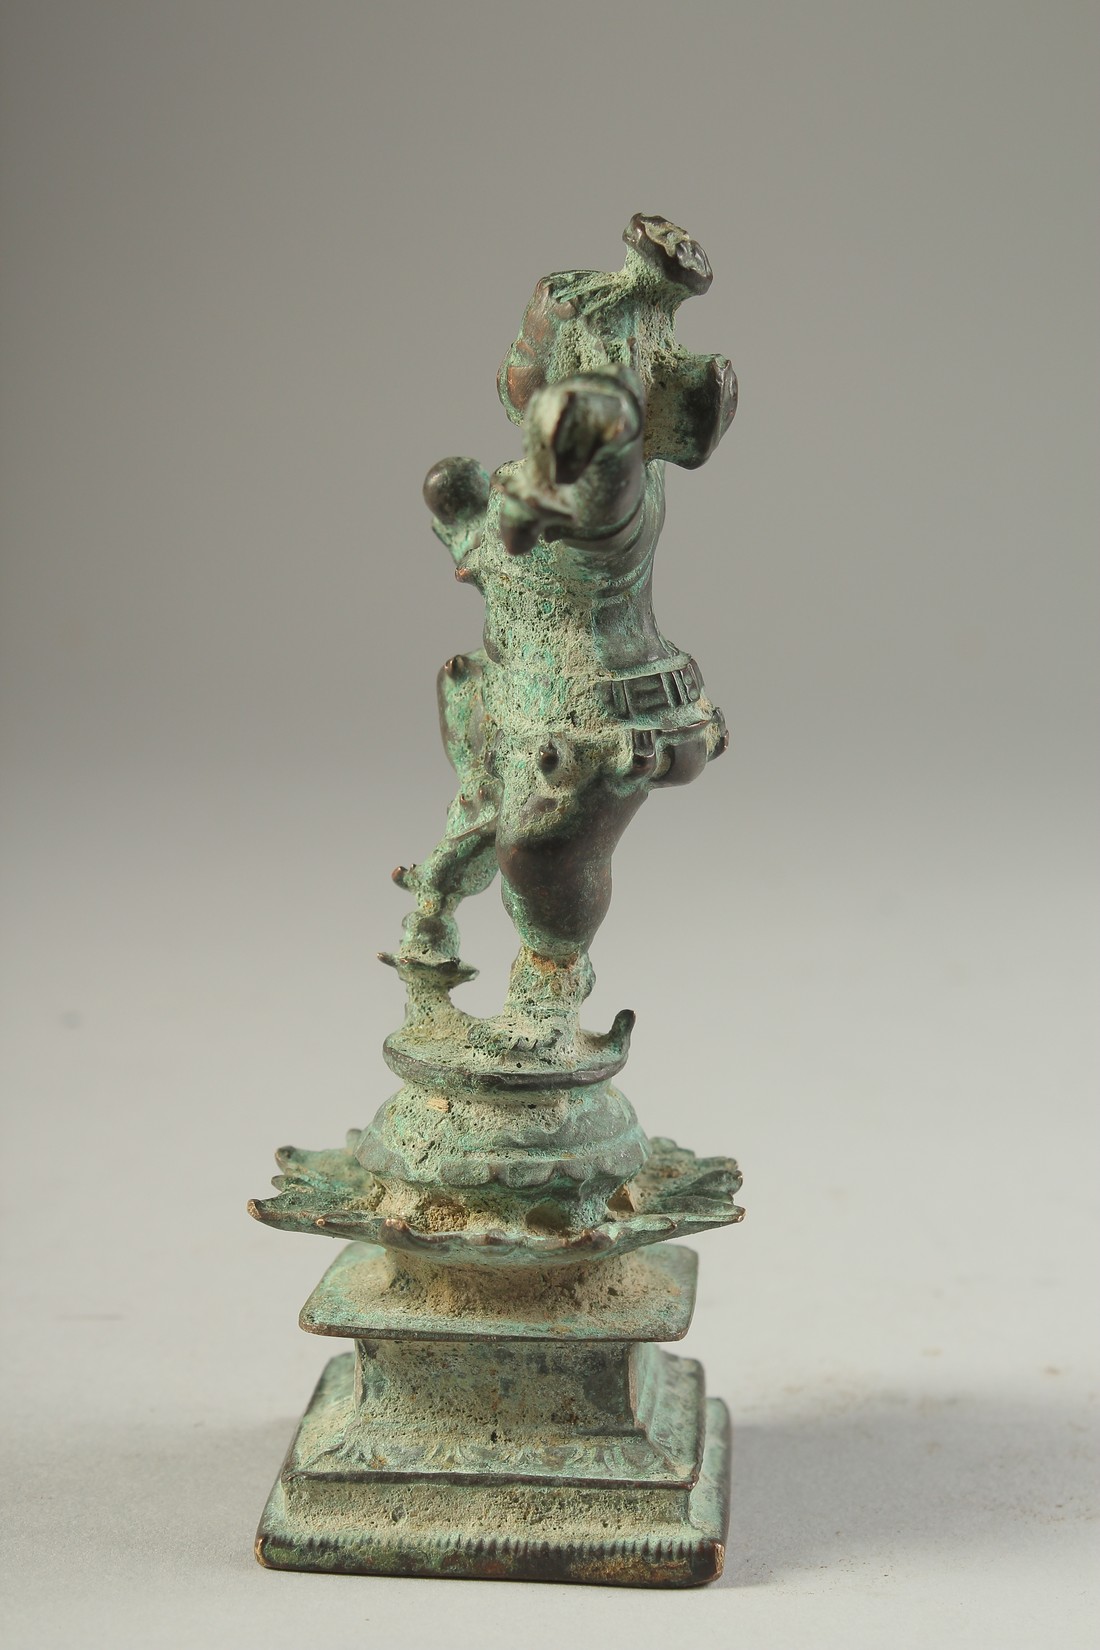 A FINE 16TH-17TH CENTURY SOUTH INDIAN BRONZE FIGURE OF BABY KRISHNA, stand on a lotus form base, - Image 4 of 4